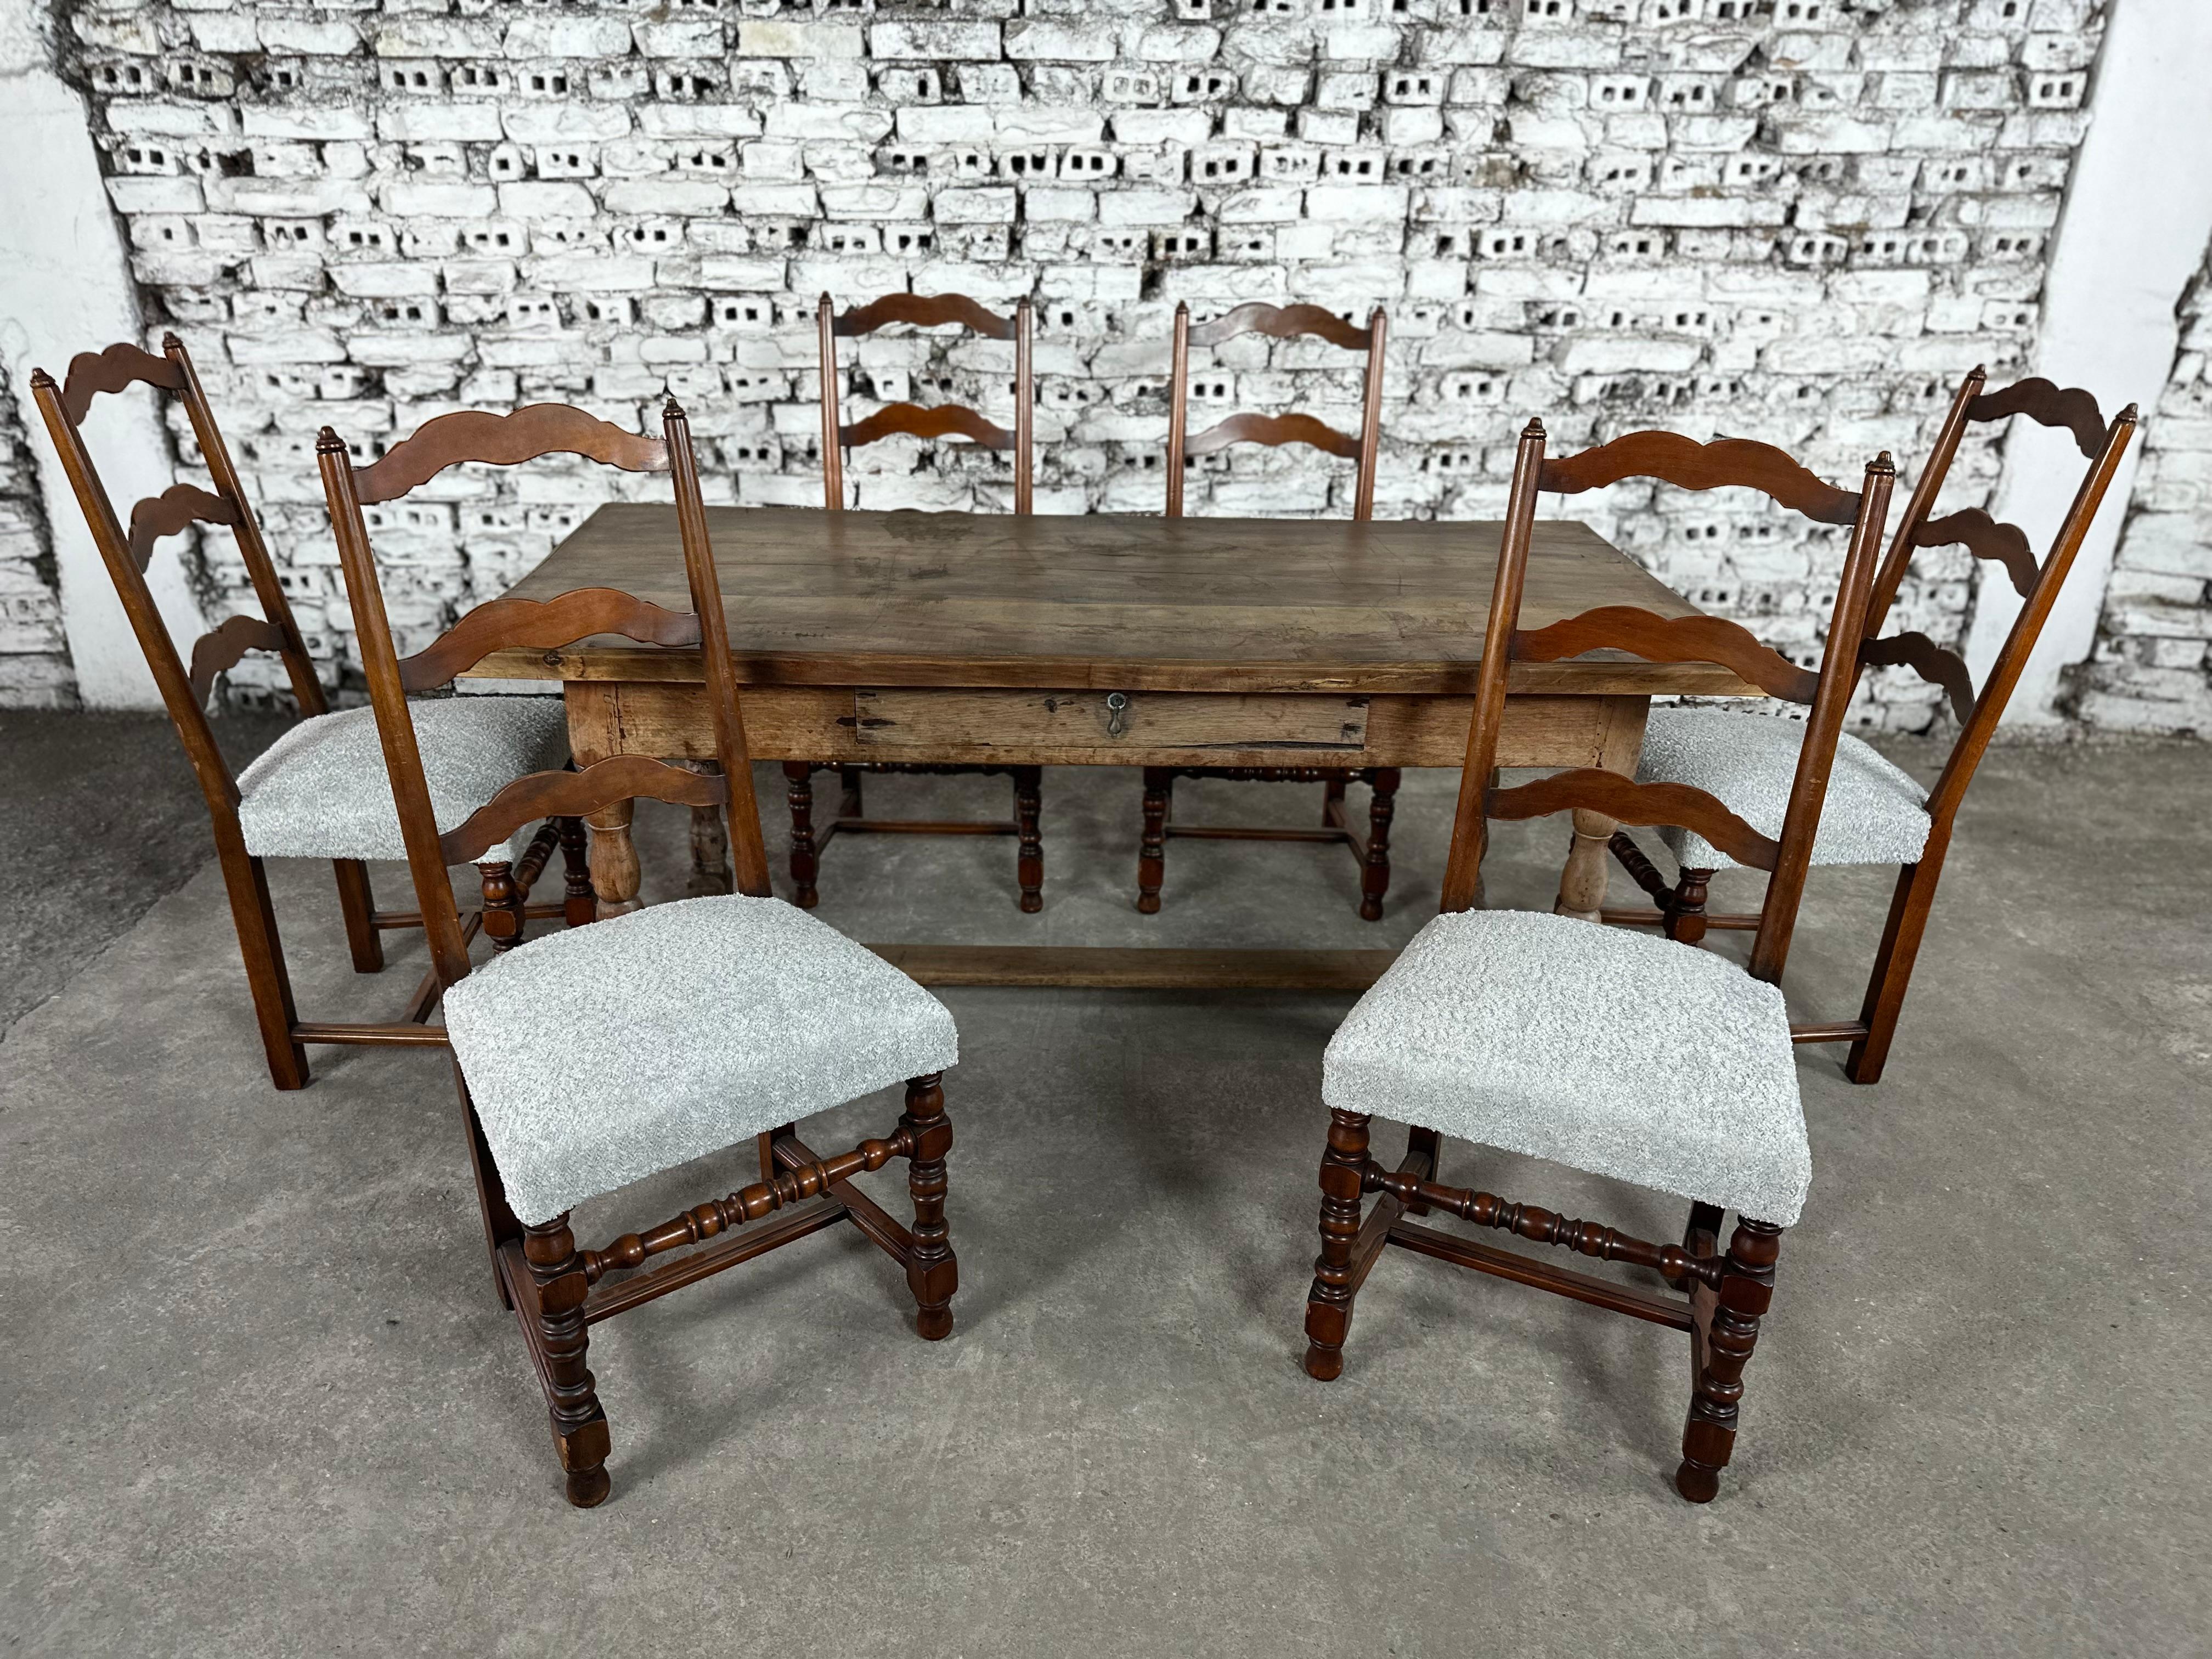 Fabric Reupholstered French Country Ladder Back Dining Chairs - Set of 6